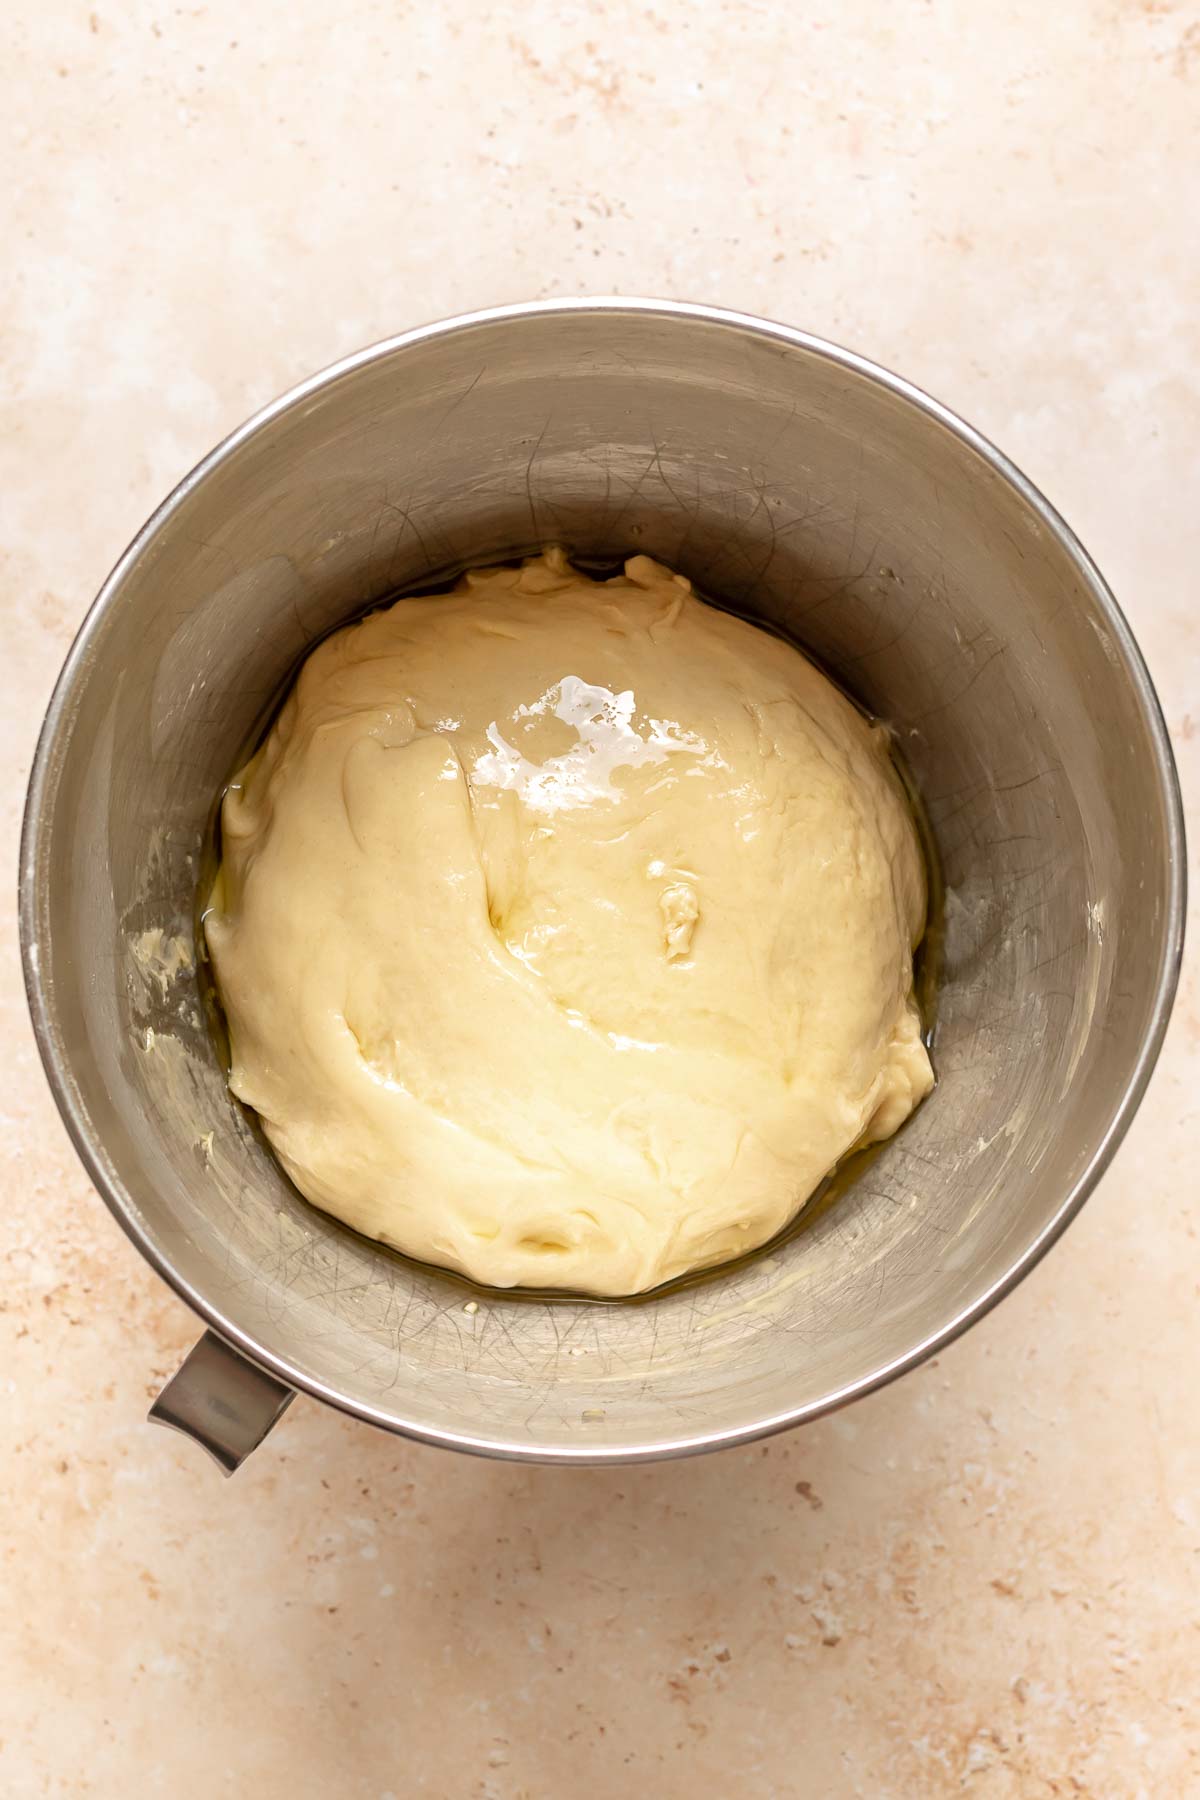 Kneaded dough covered in oil in a bowl.